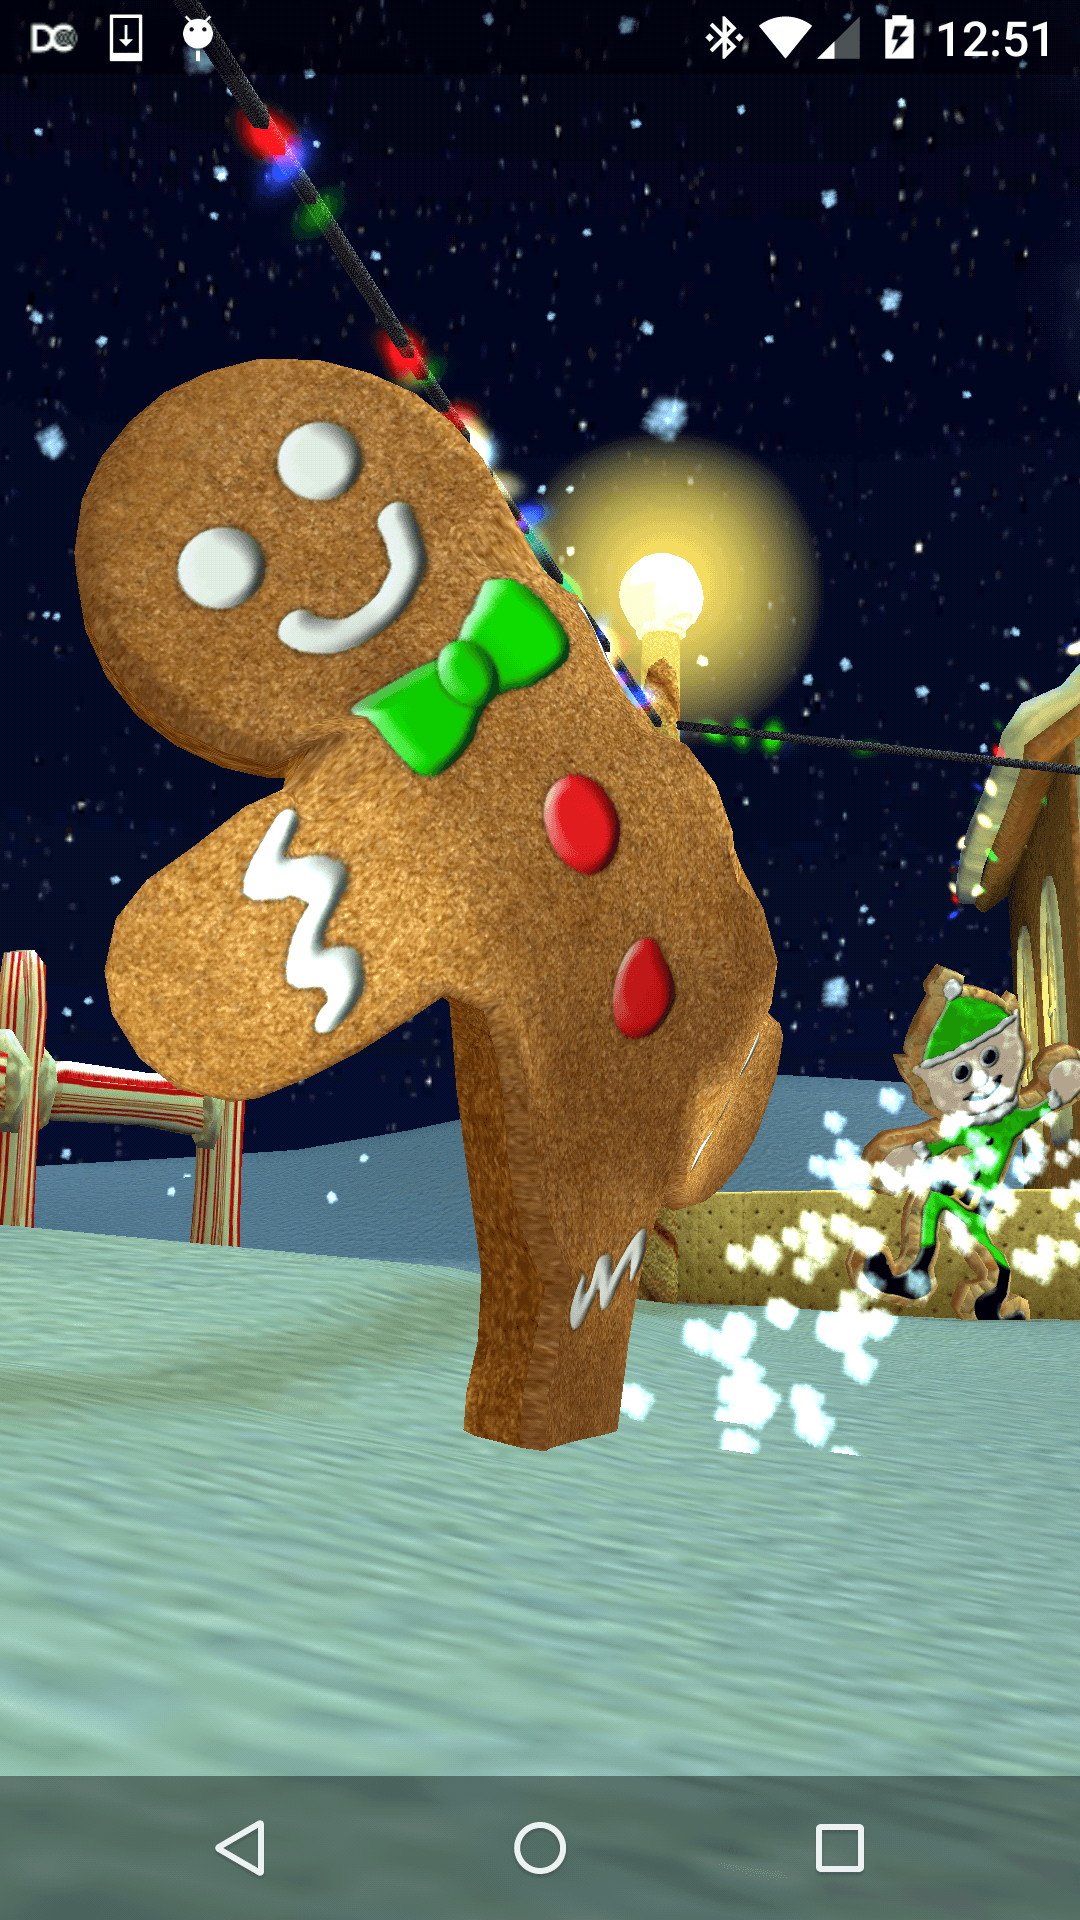 wallpaper images download,gingerbread,cartoon,illustration,animation,christmas eve